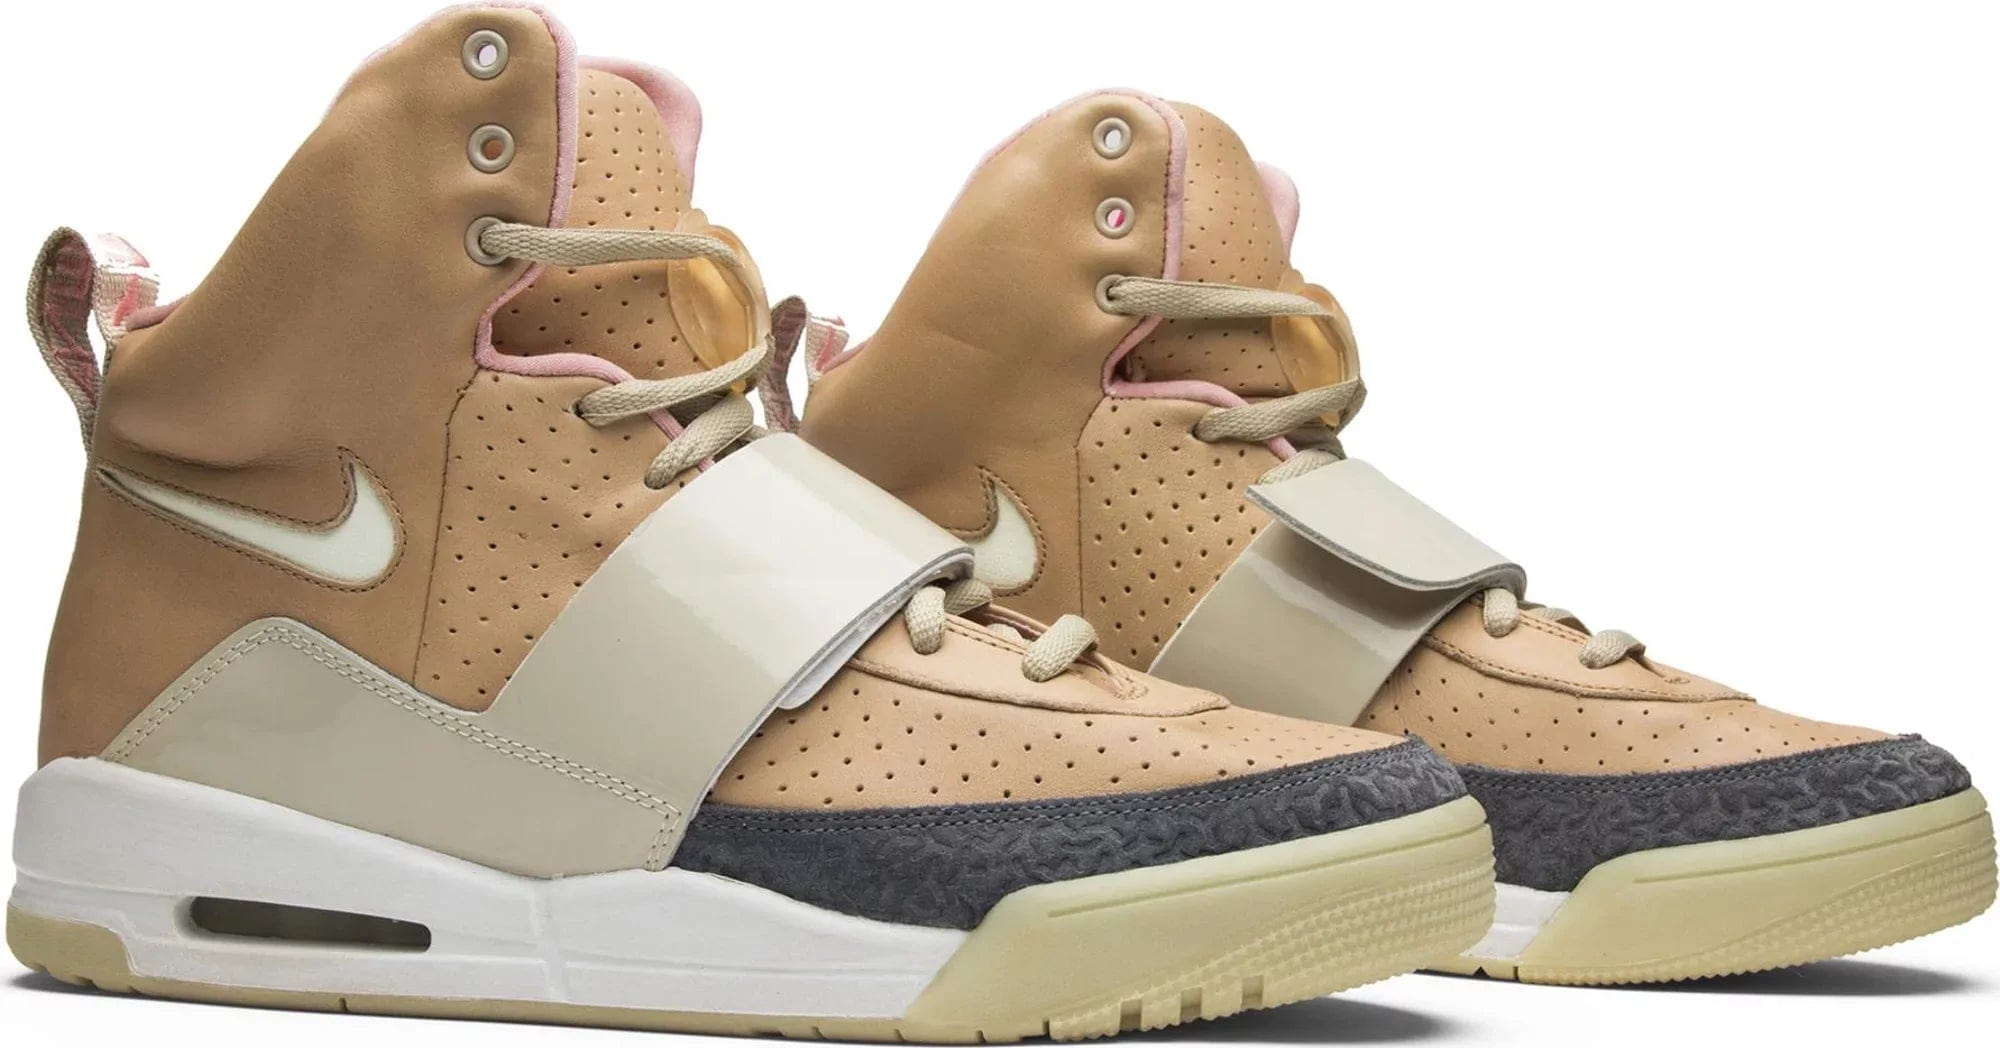 Nike Air Yeezy 1 Sneakers for Men for Sale